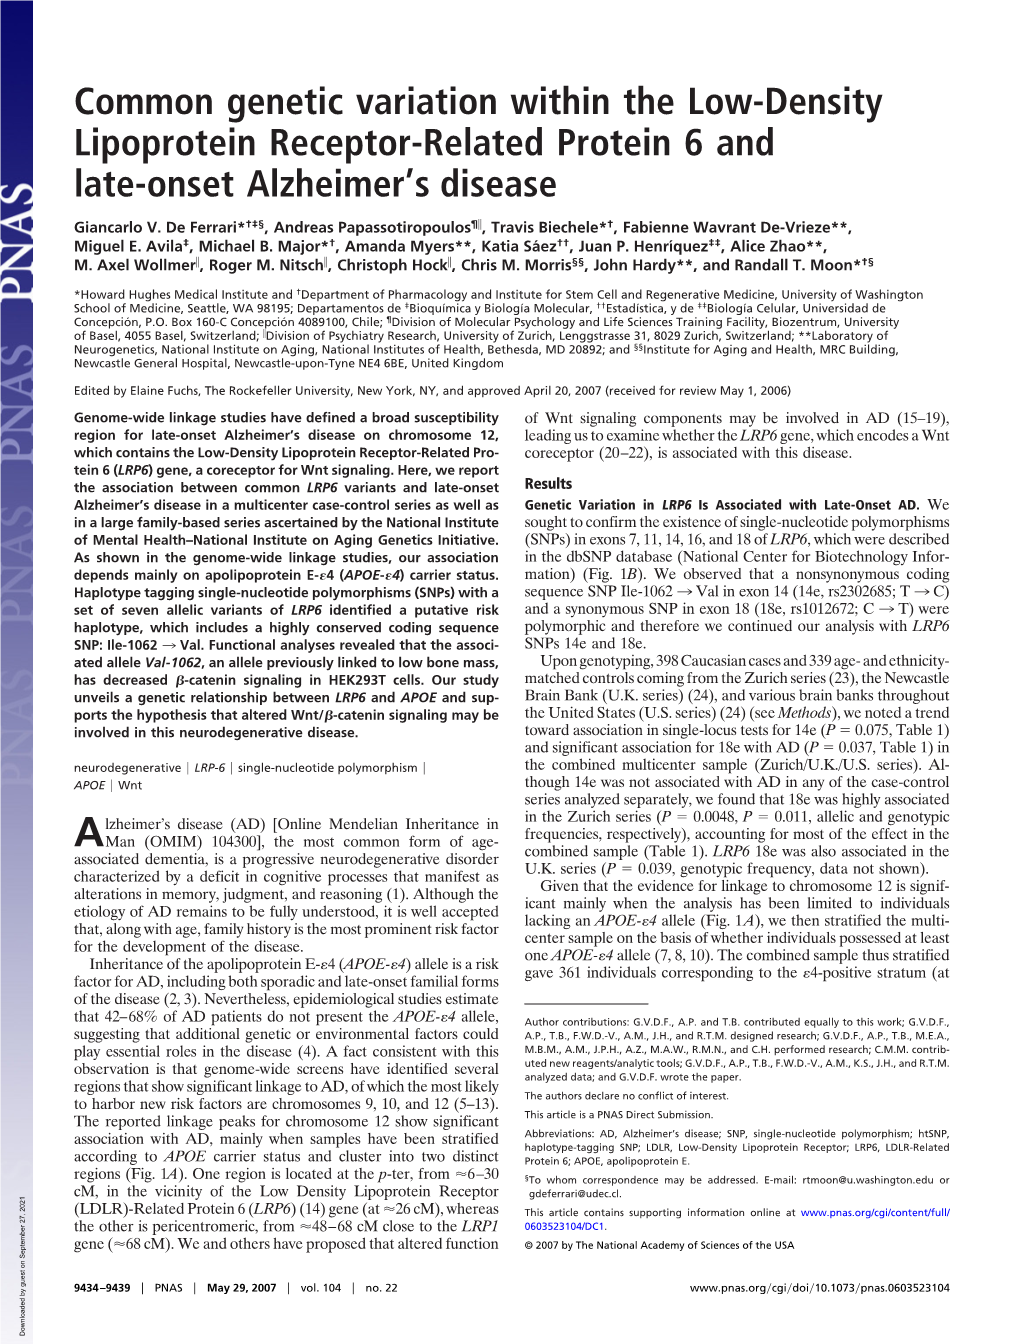 Common Genetic Variation Within the Low-Density Lipoprotein Receptor-Related Protein 6 and Late-Onset Alzheimer’S Disease